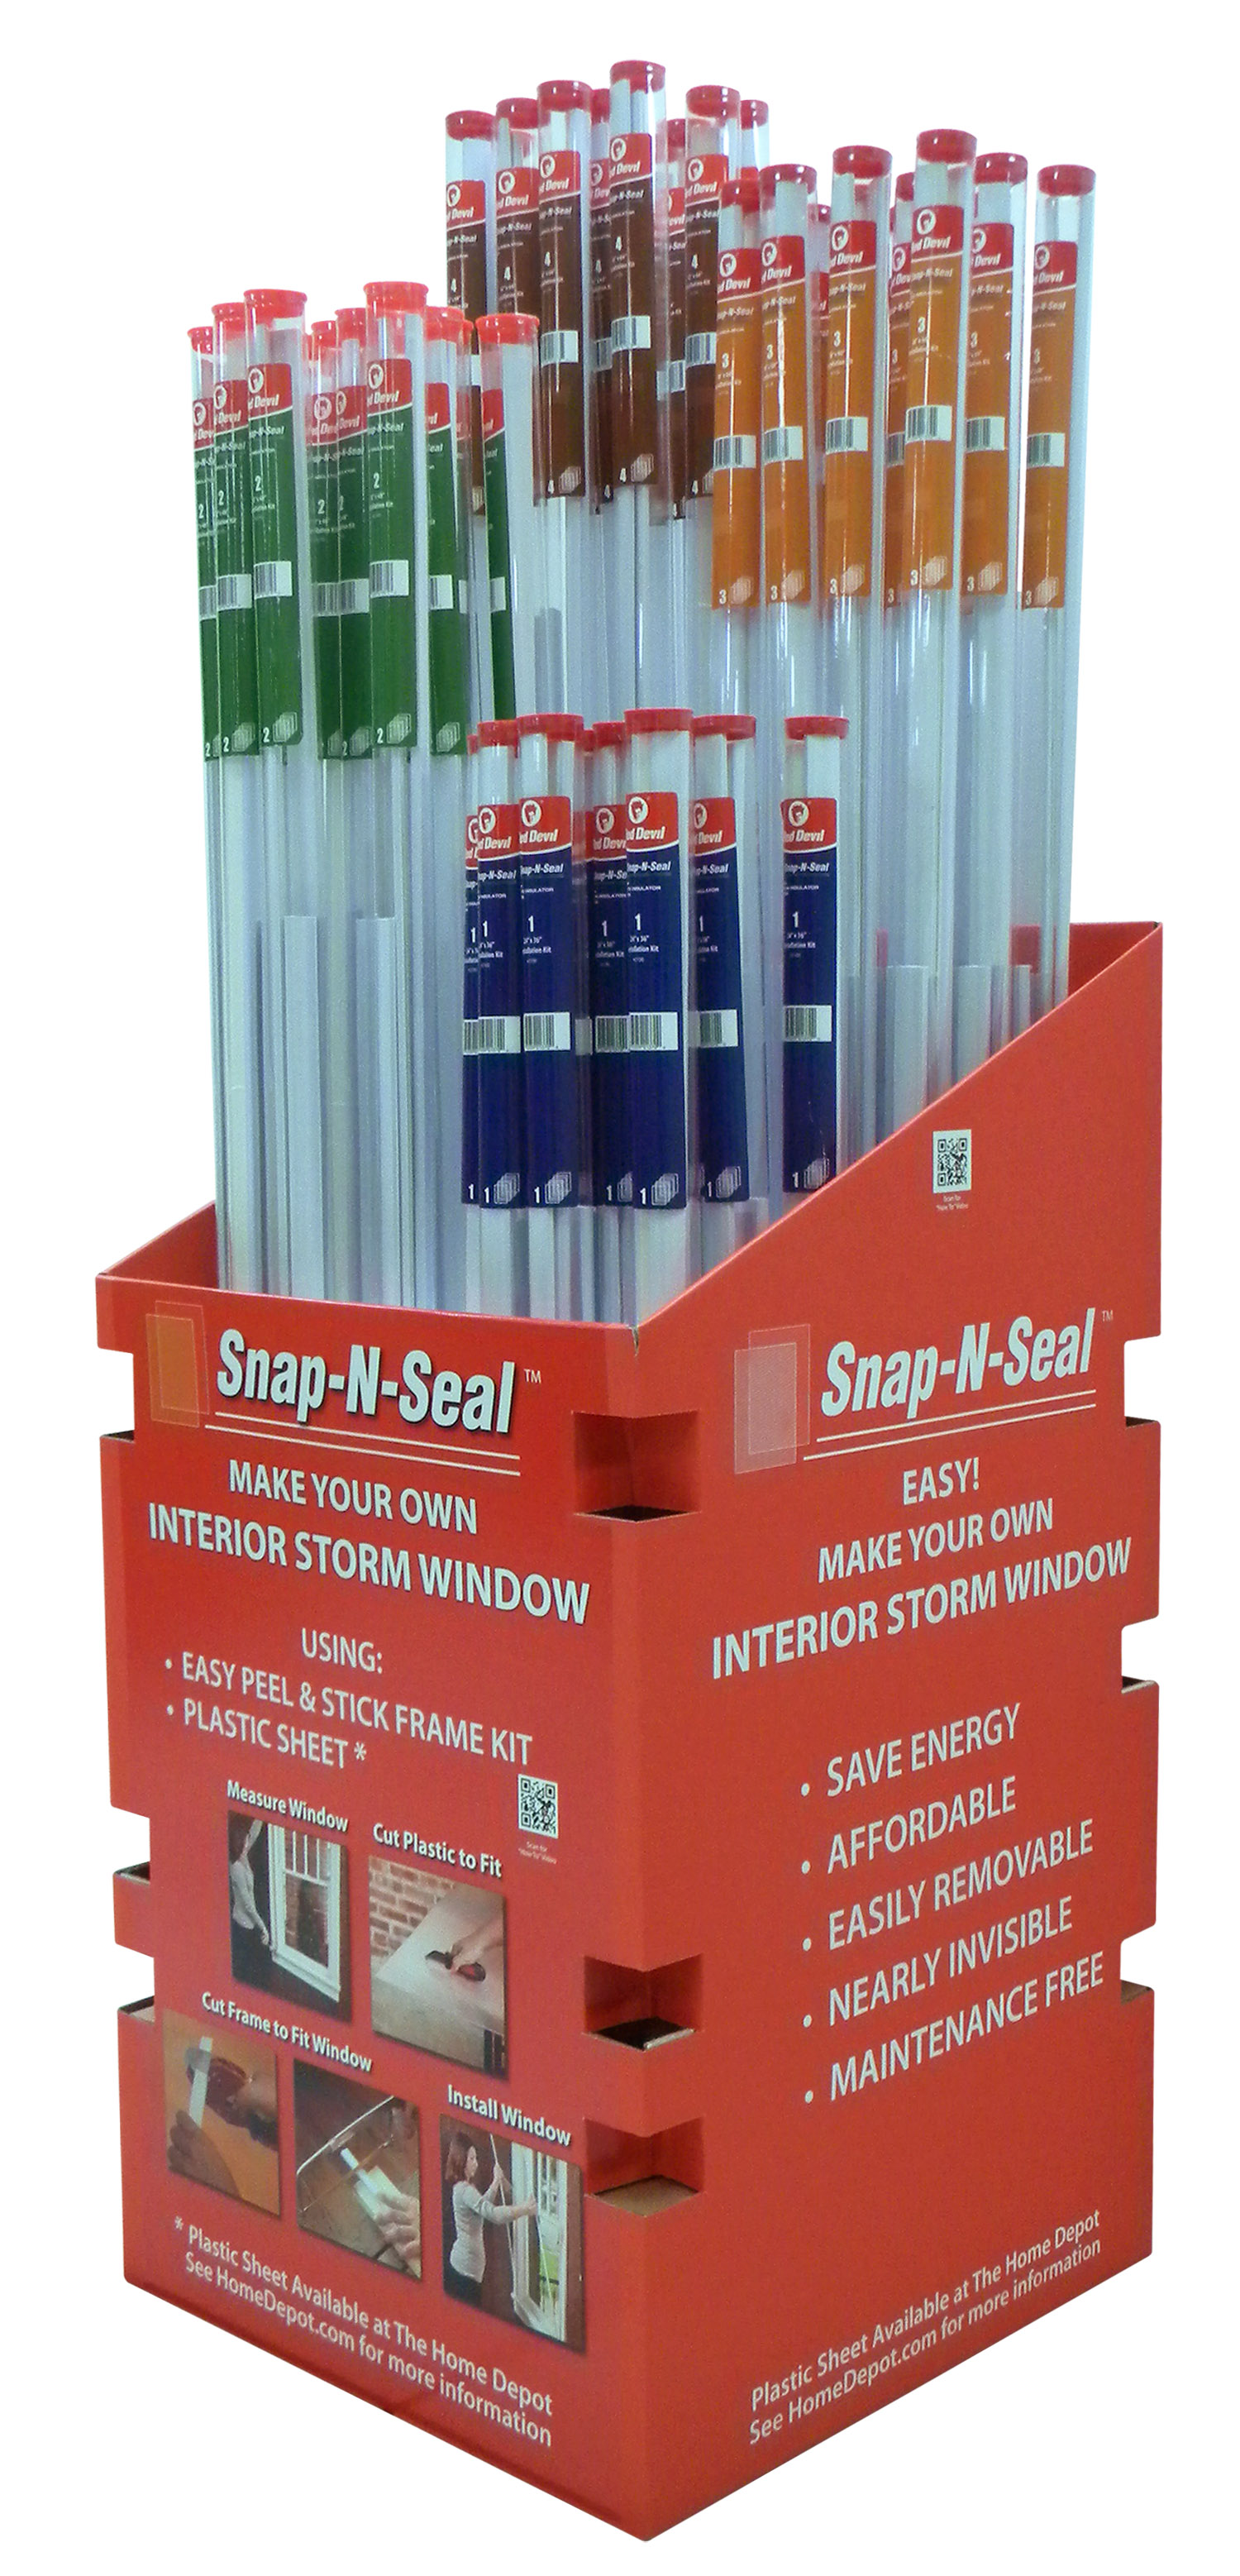 Look for Snap-N-Seal in these bold, colorful store displays.